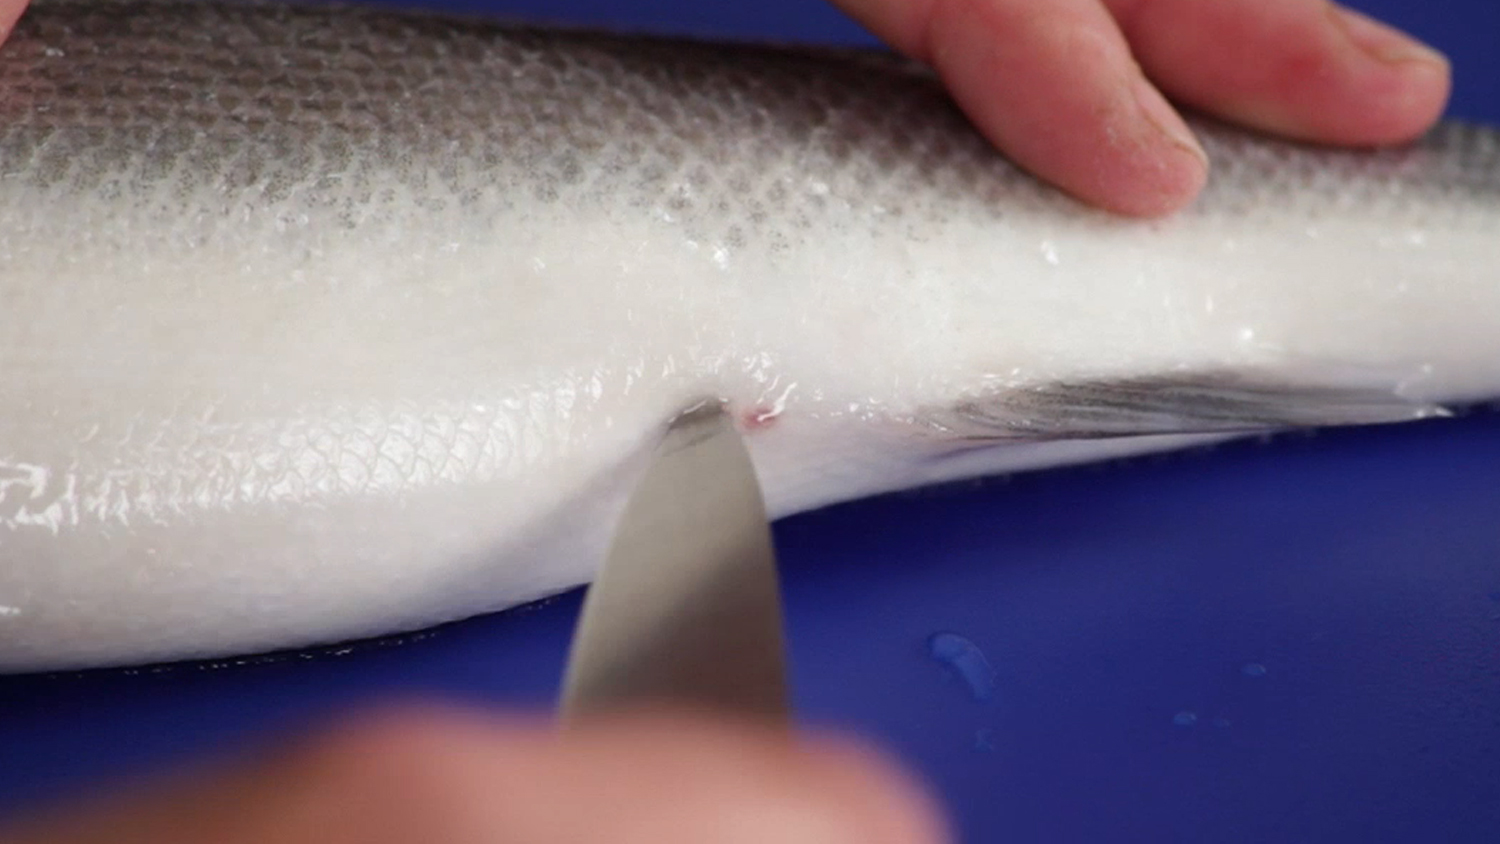 How to Clean, Scale, and Fillet a Fish